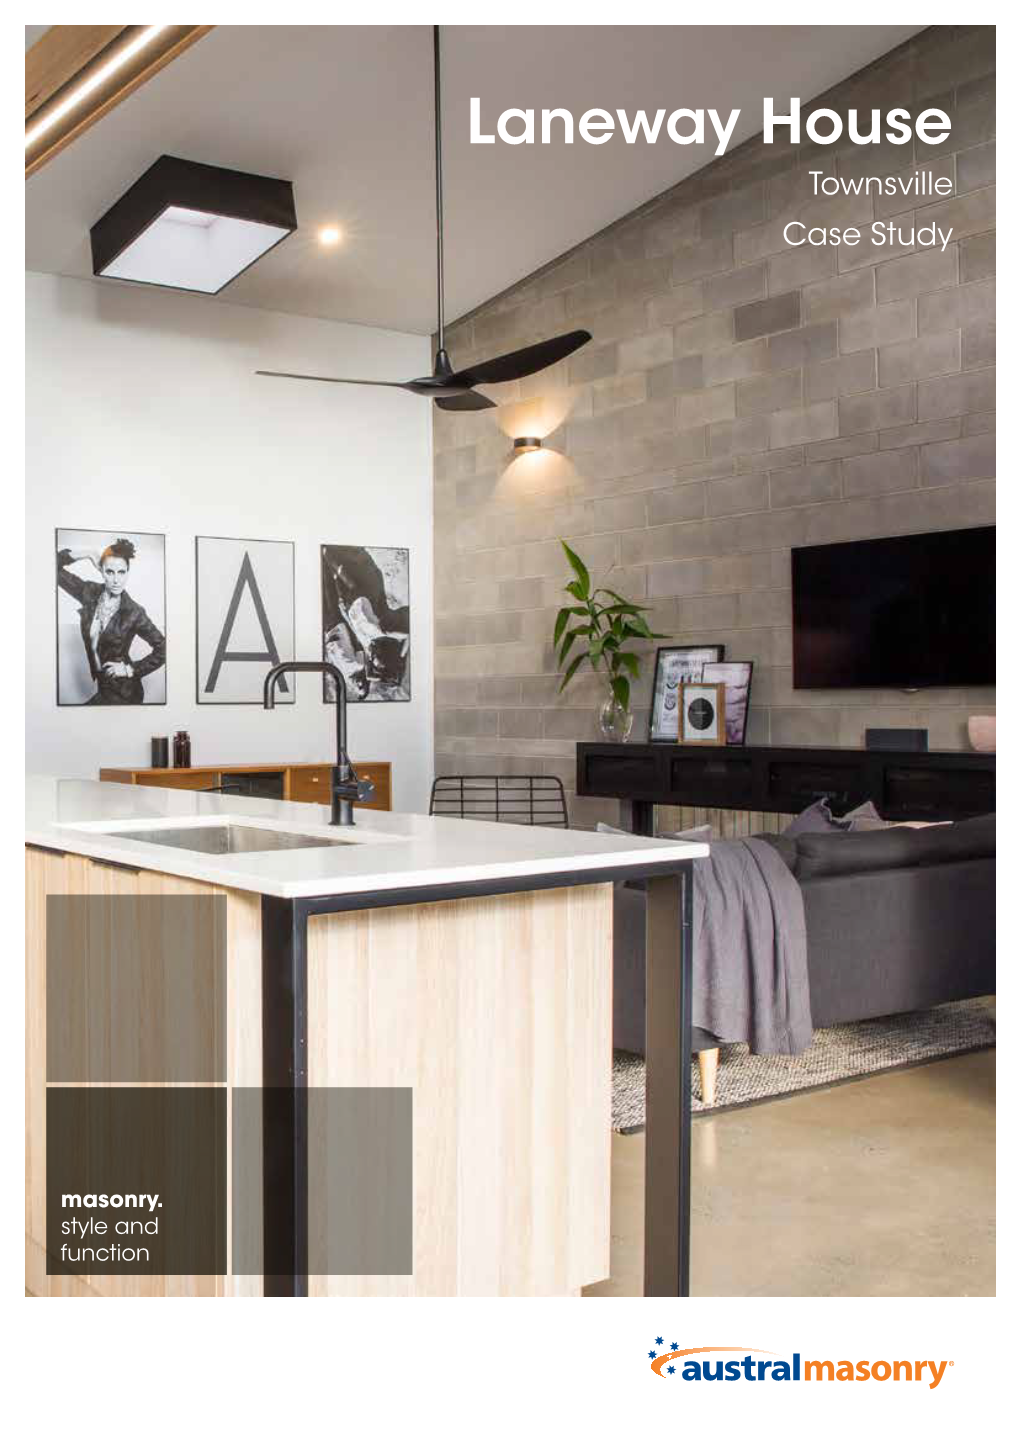 Laneway House Townsville Case Study